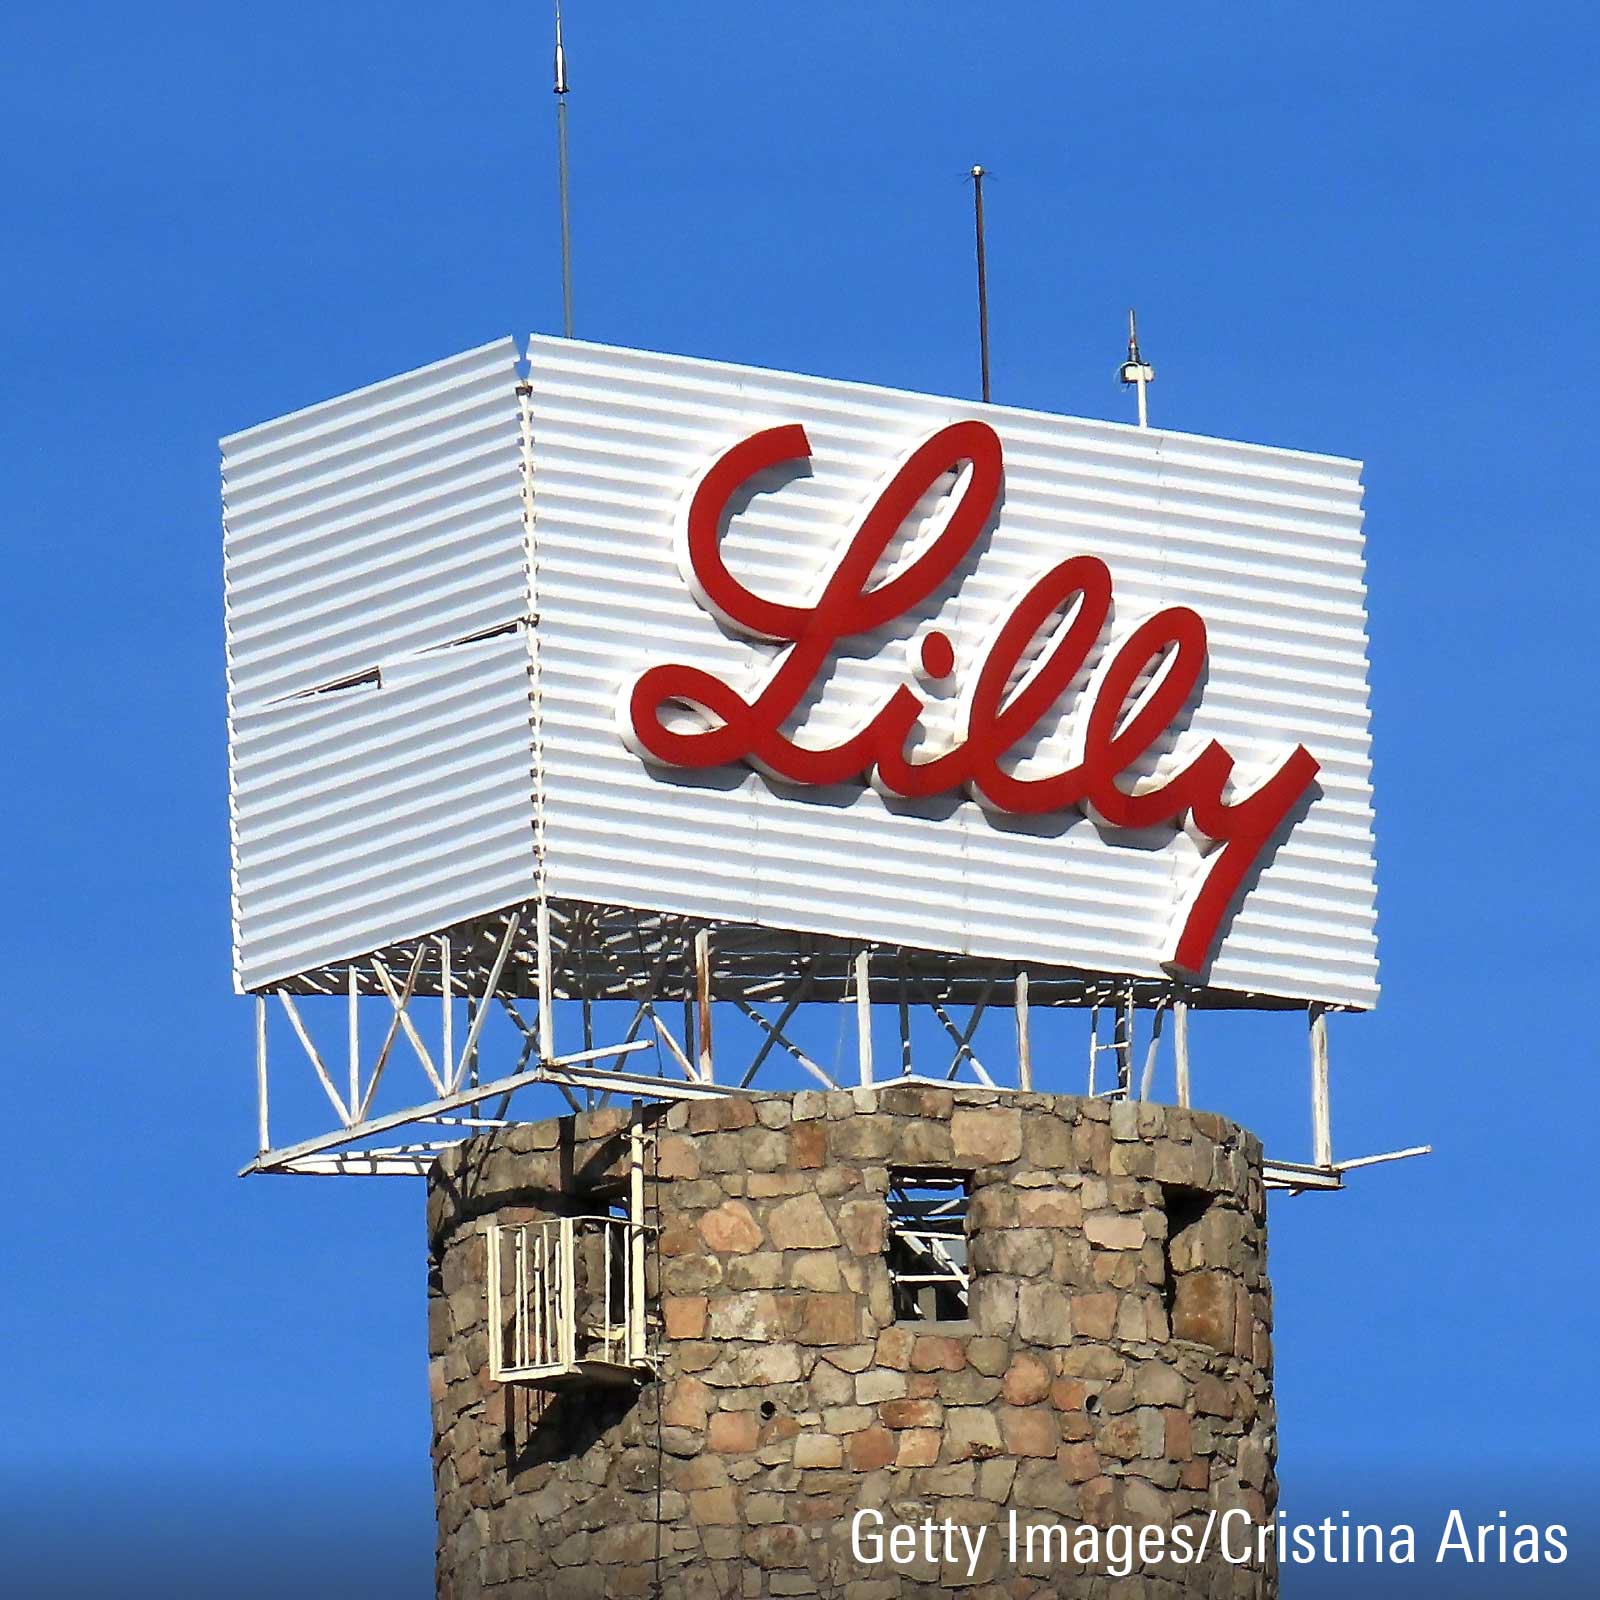 Going Into Earnings, Is Eli Lilly Stock a Buy, a Sell, or Fairly Valued?